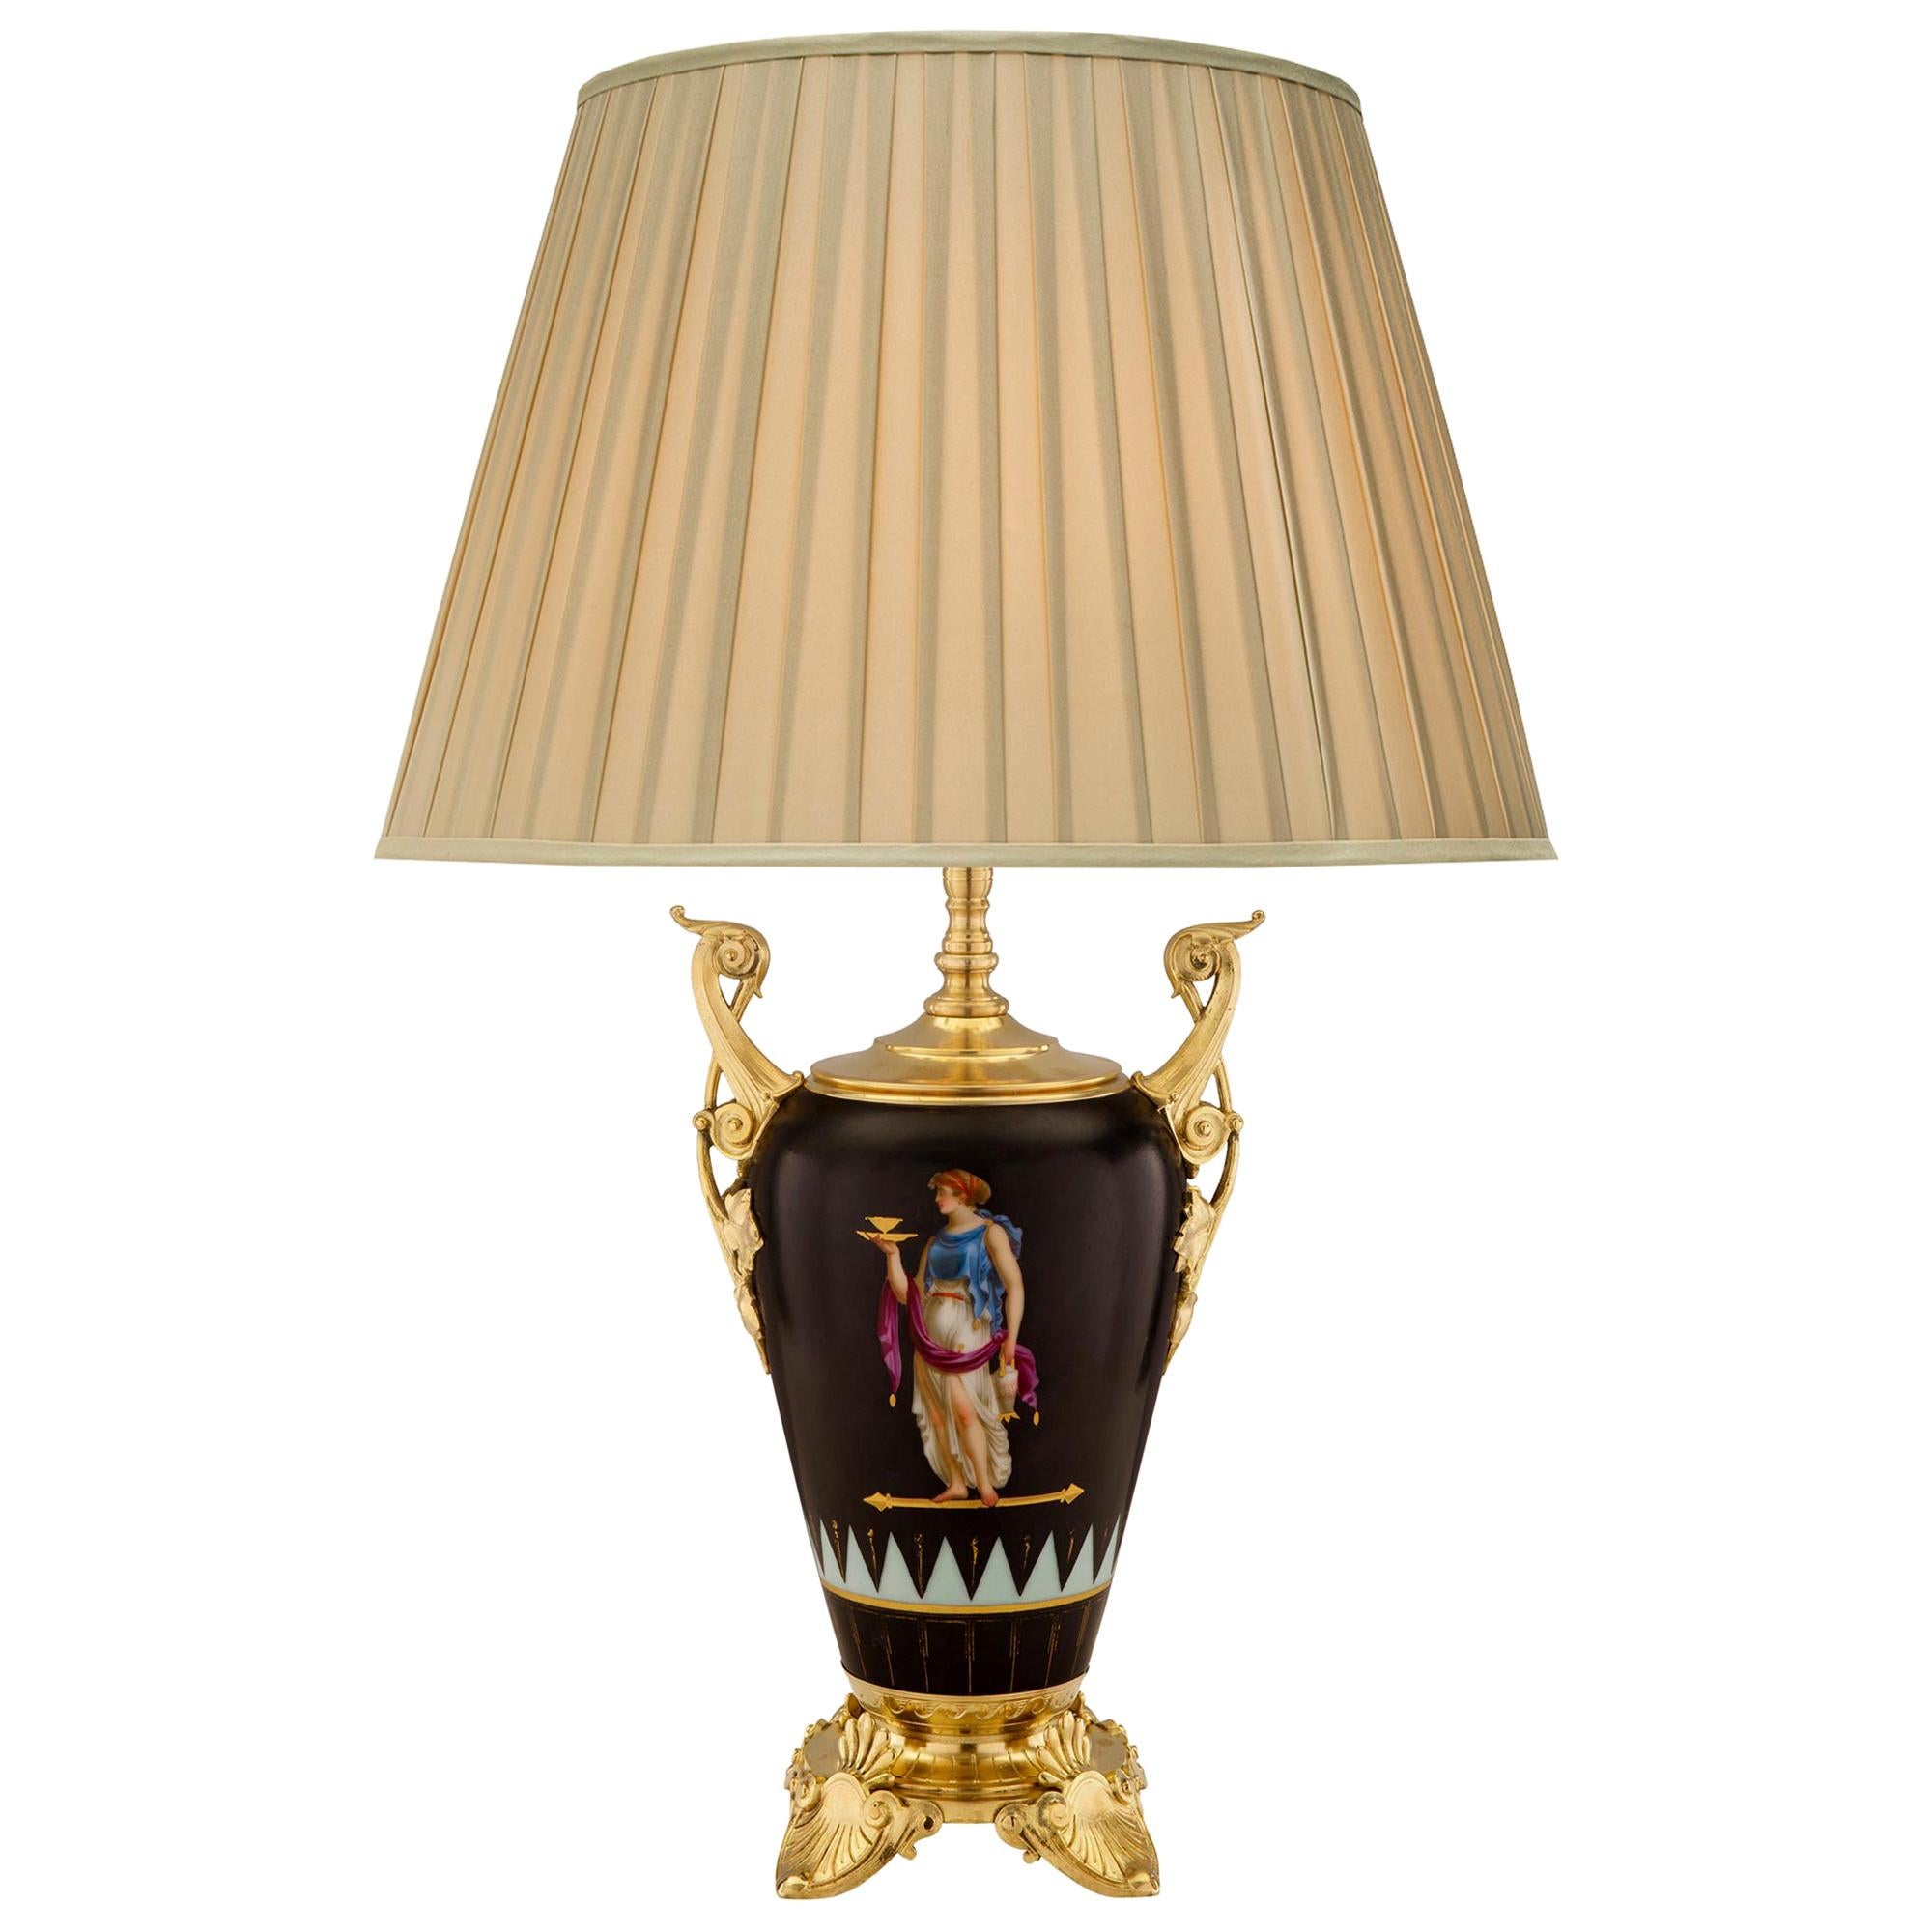 French 19th Century Neo-Grec Style Ormolu and Porcelain Lamp For Sale